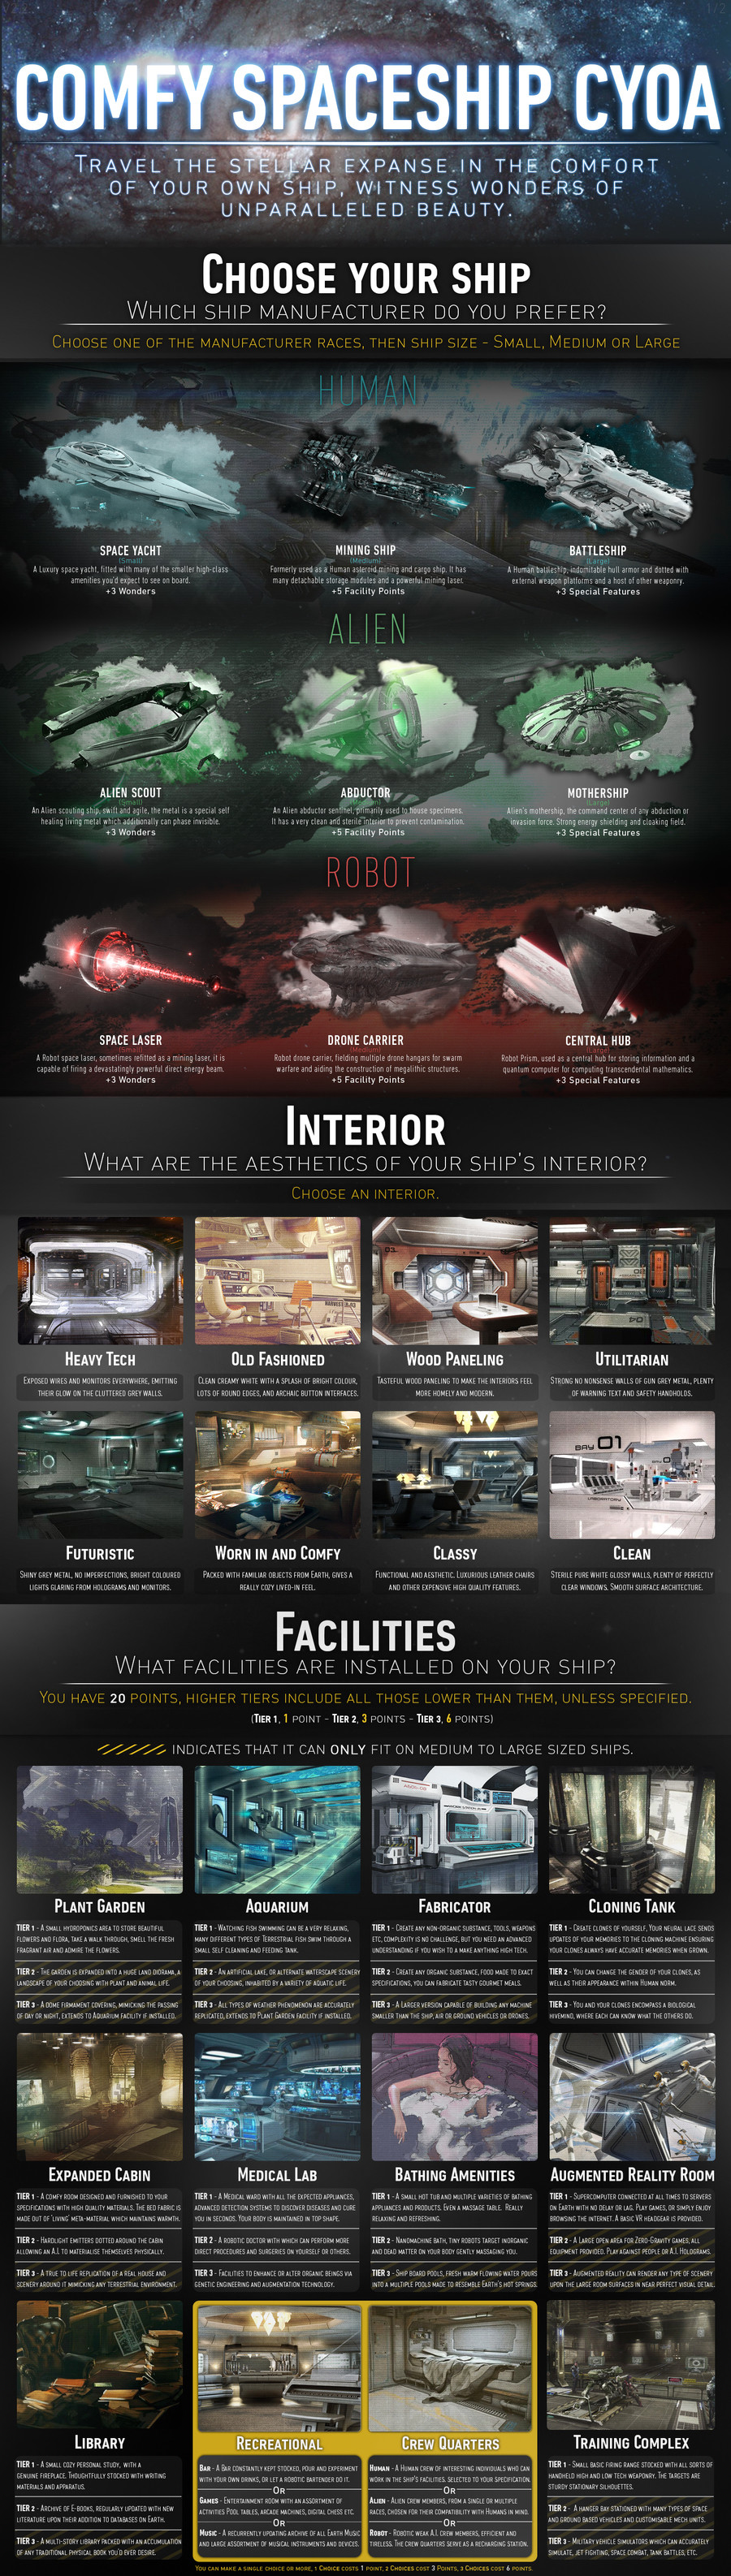 Comfy Spaceship CYOA. .. Human Battleship with Old Fashioned interior Facilities: Tier 2 Fabricator - 3 points Tier 1 Medical Lab - 1 points Tier 1 Plant Garden - 1 point Tier 2 Library